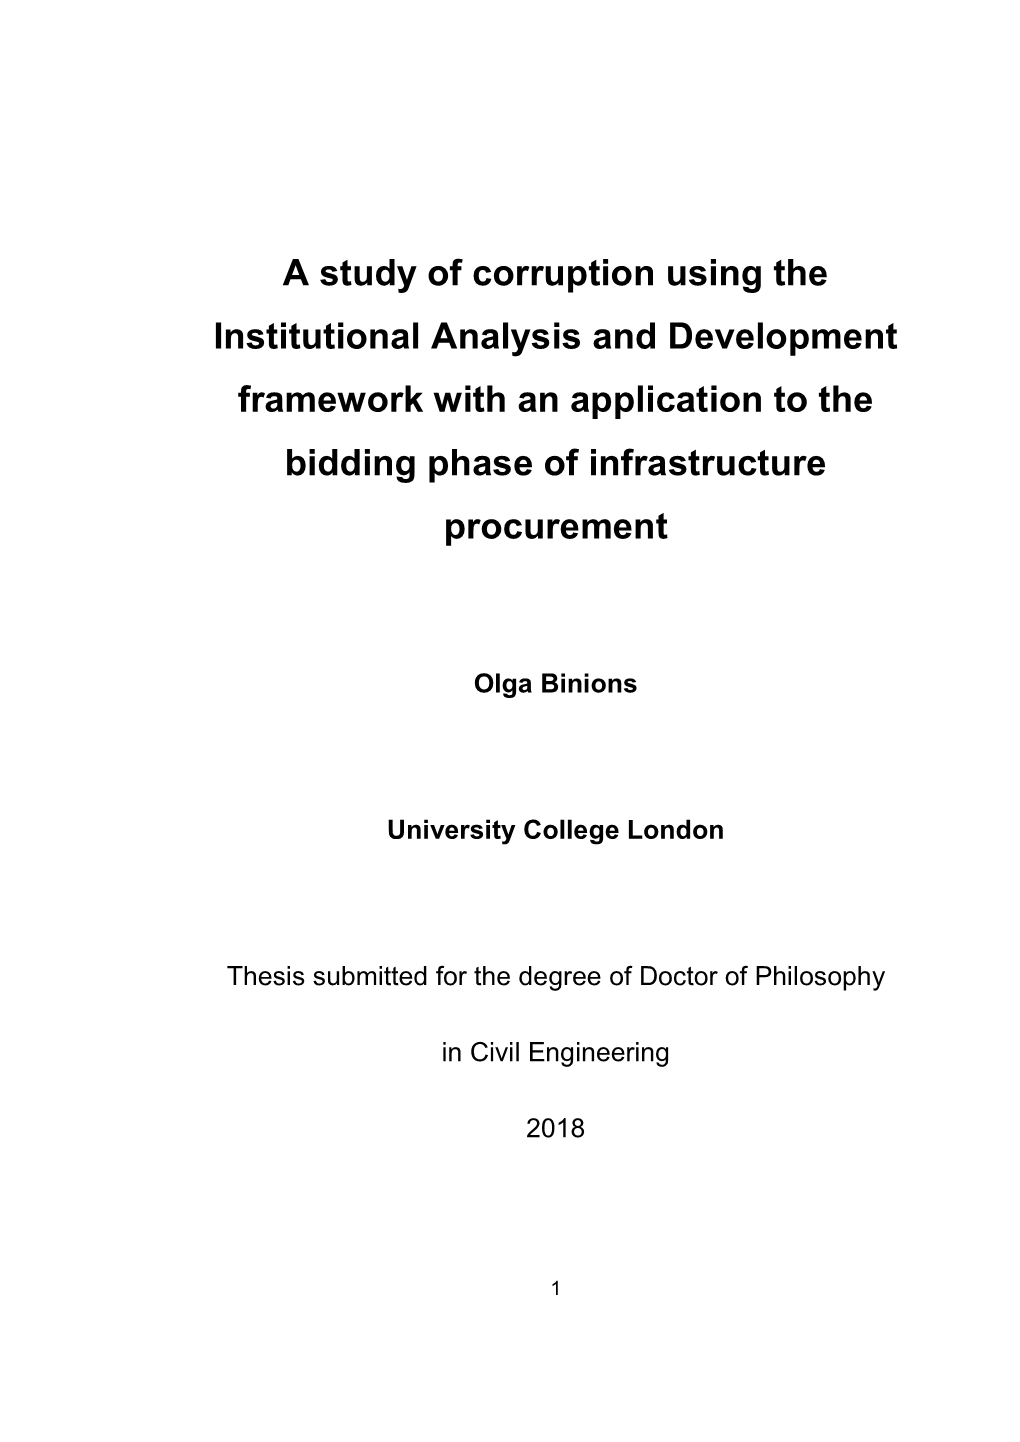 A Study of Corruption Using the Institutional Analysis and Development Framework with an Application to the Bidding Phase of Infrastructure Procurement